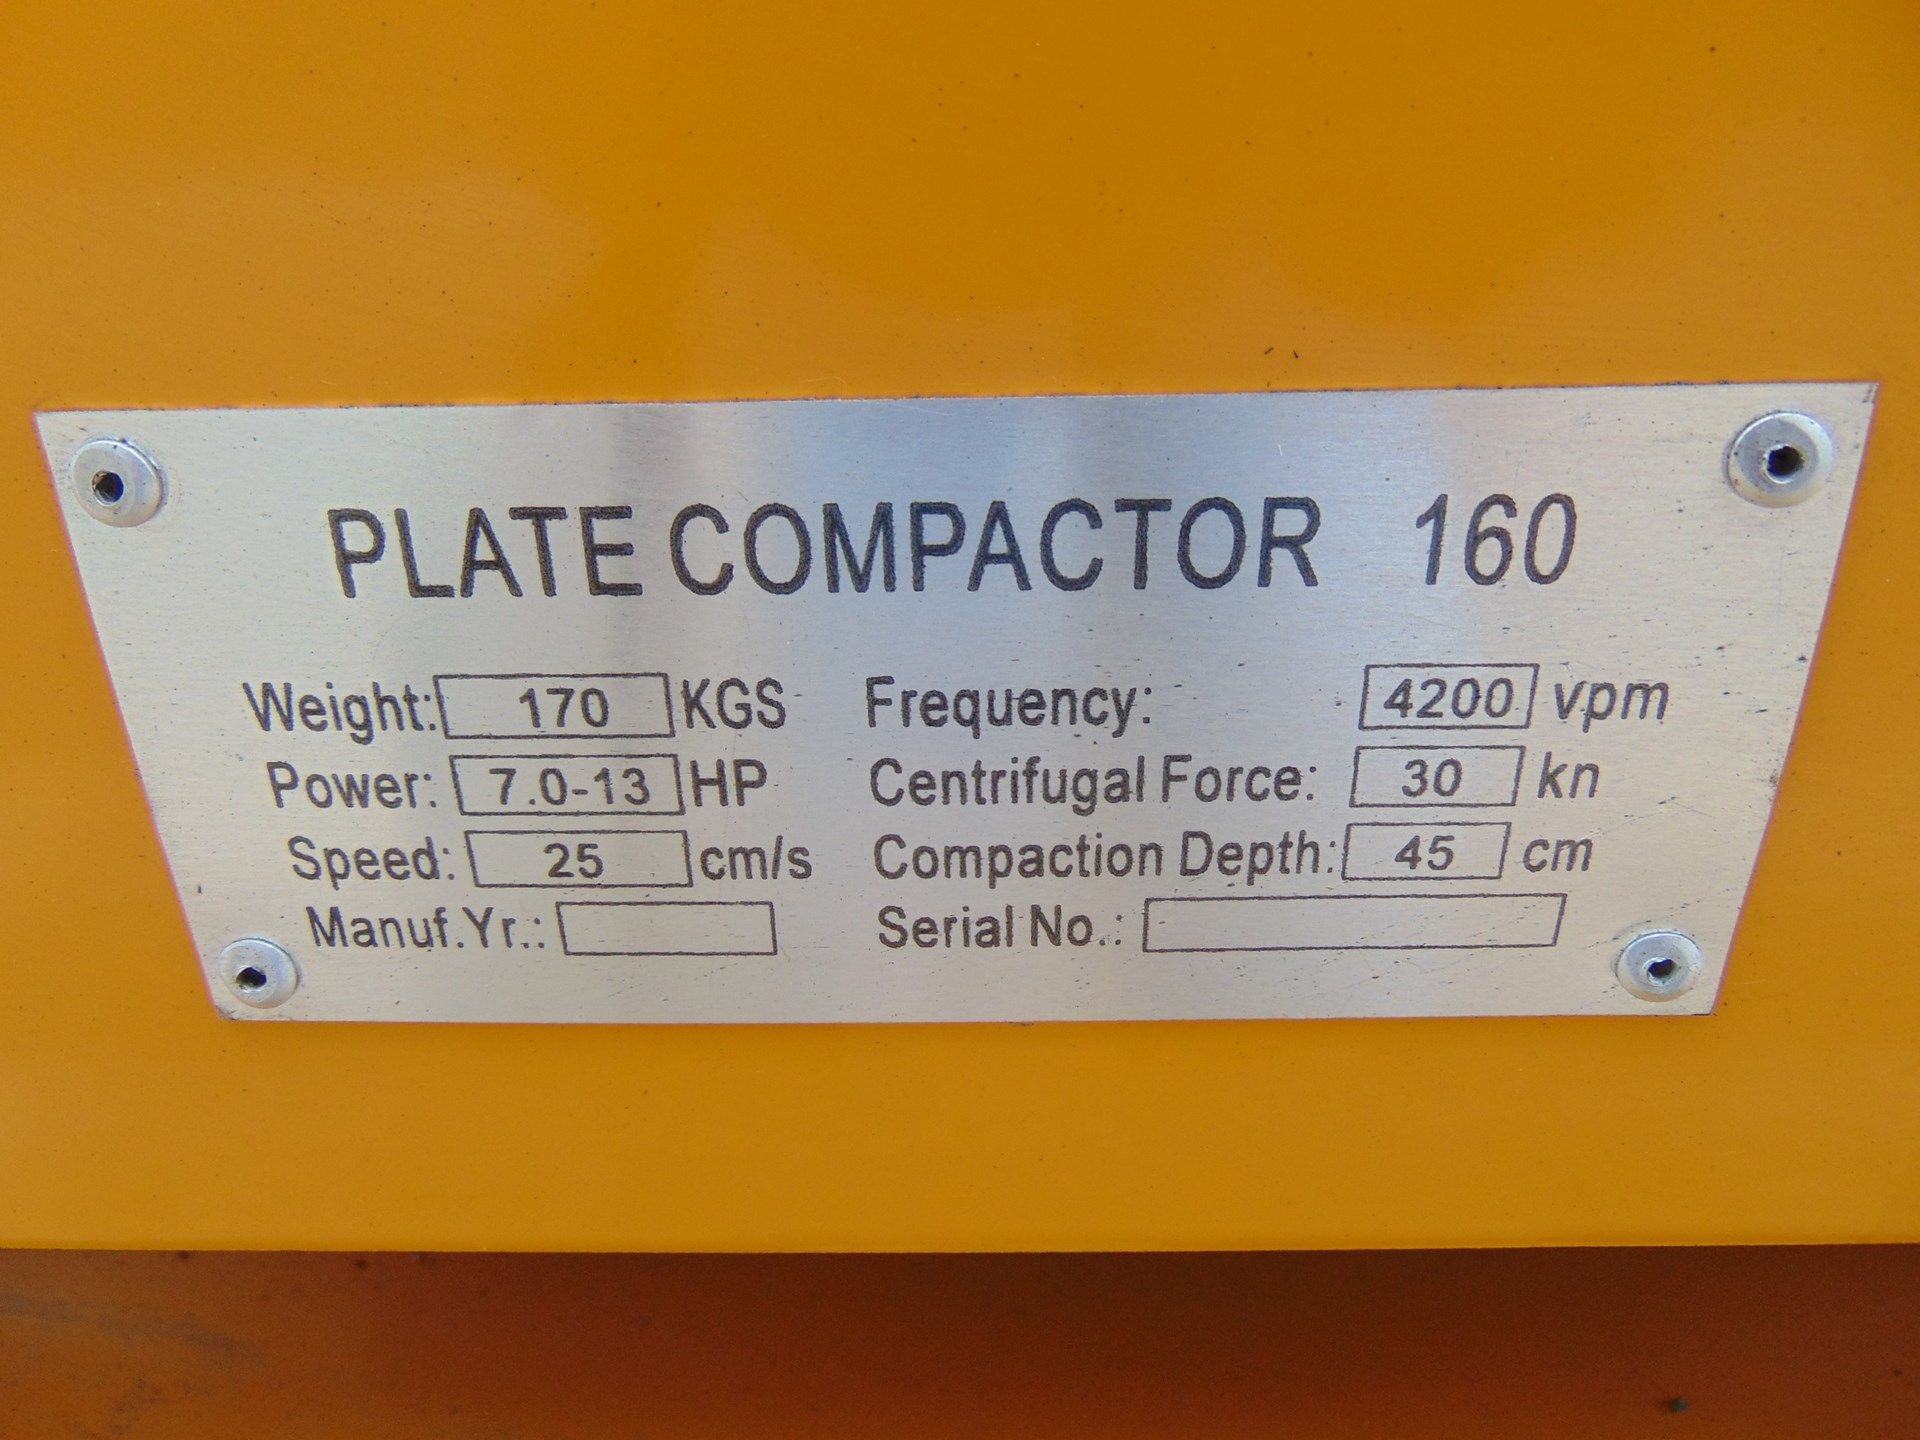 New & Unused SNK Power C160 Petrol Powered Compaction Wacker Plate - Image 9 of 11